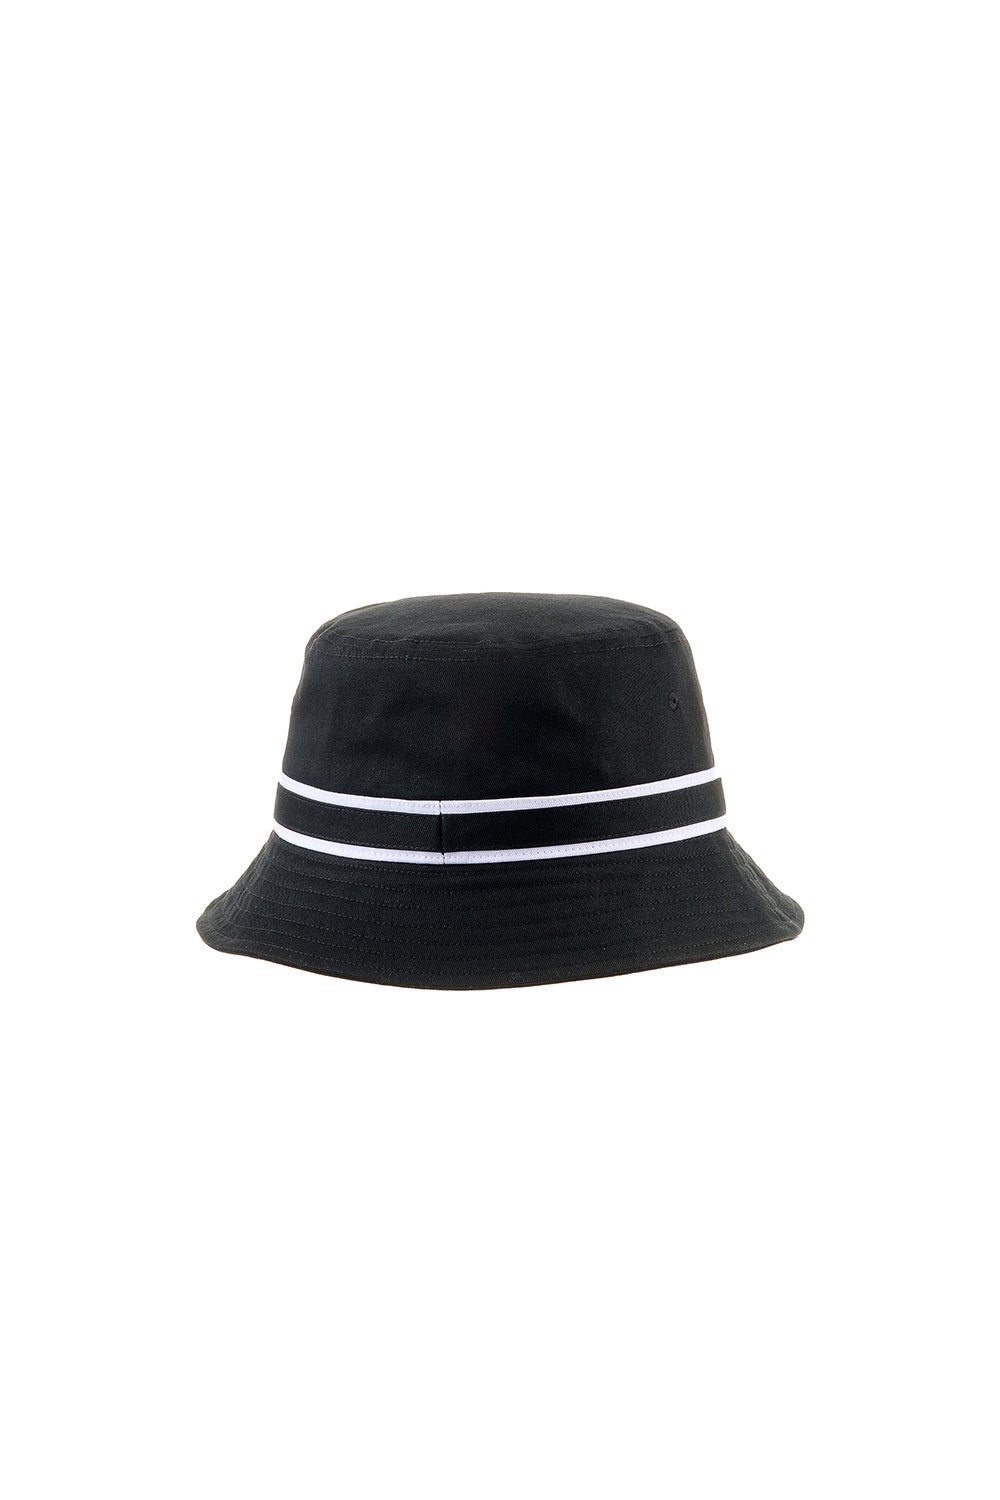 Levi's Bucket Hat with Poster Logo Black